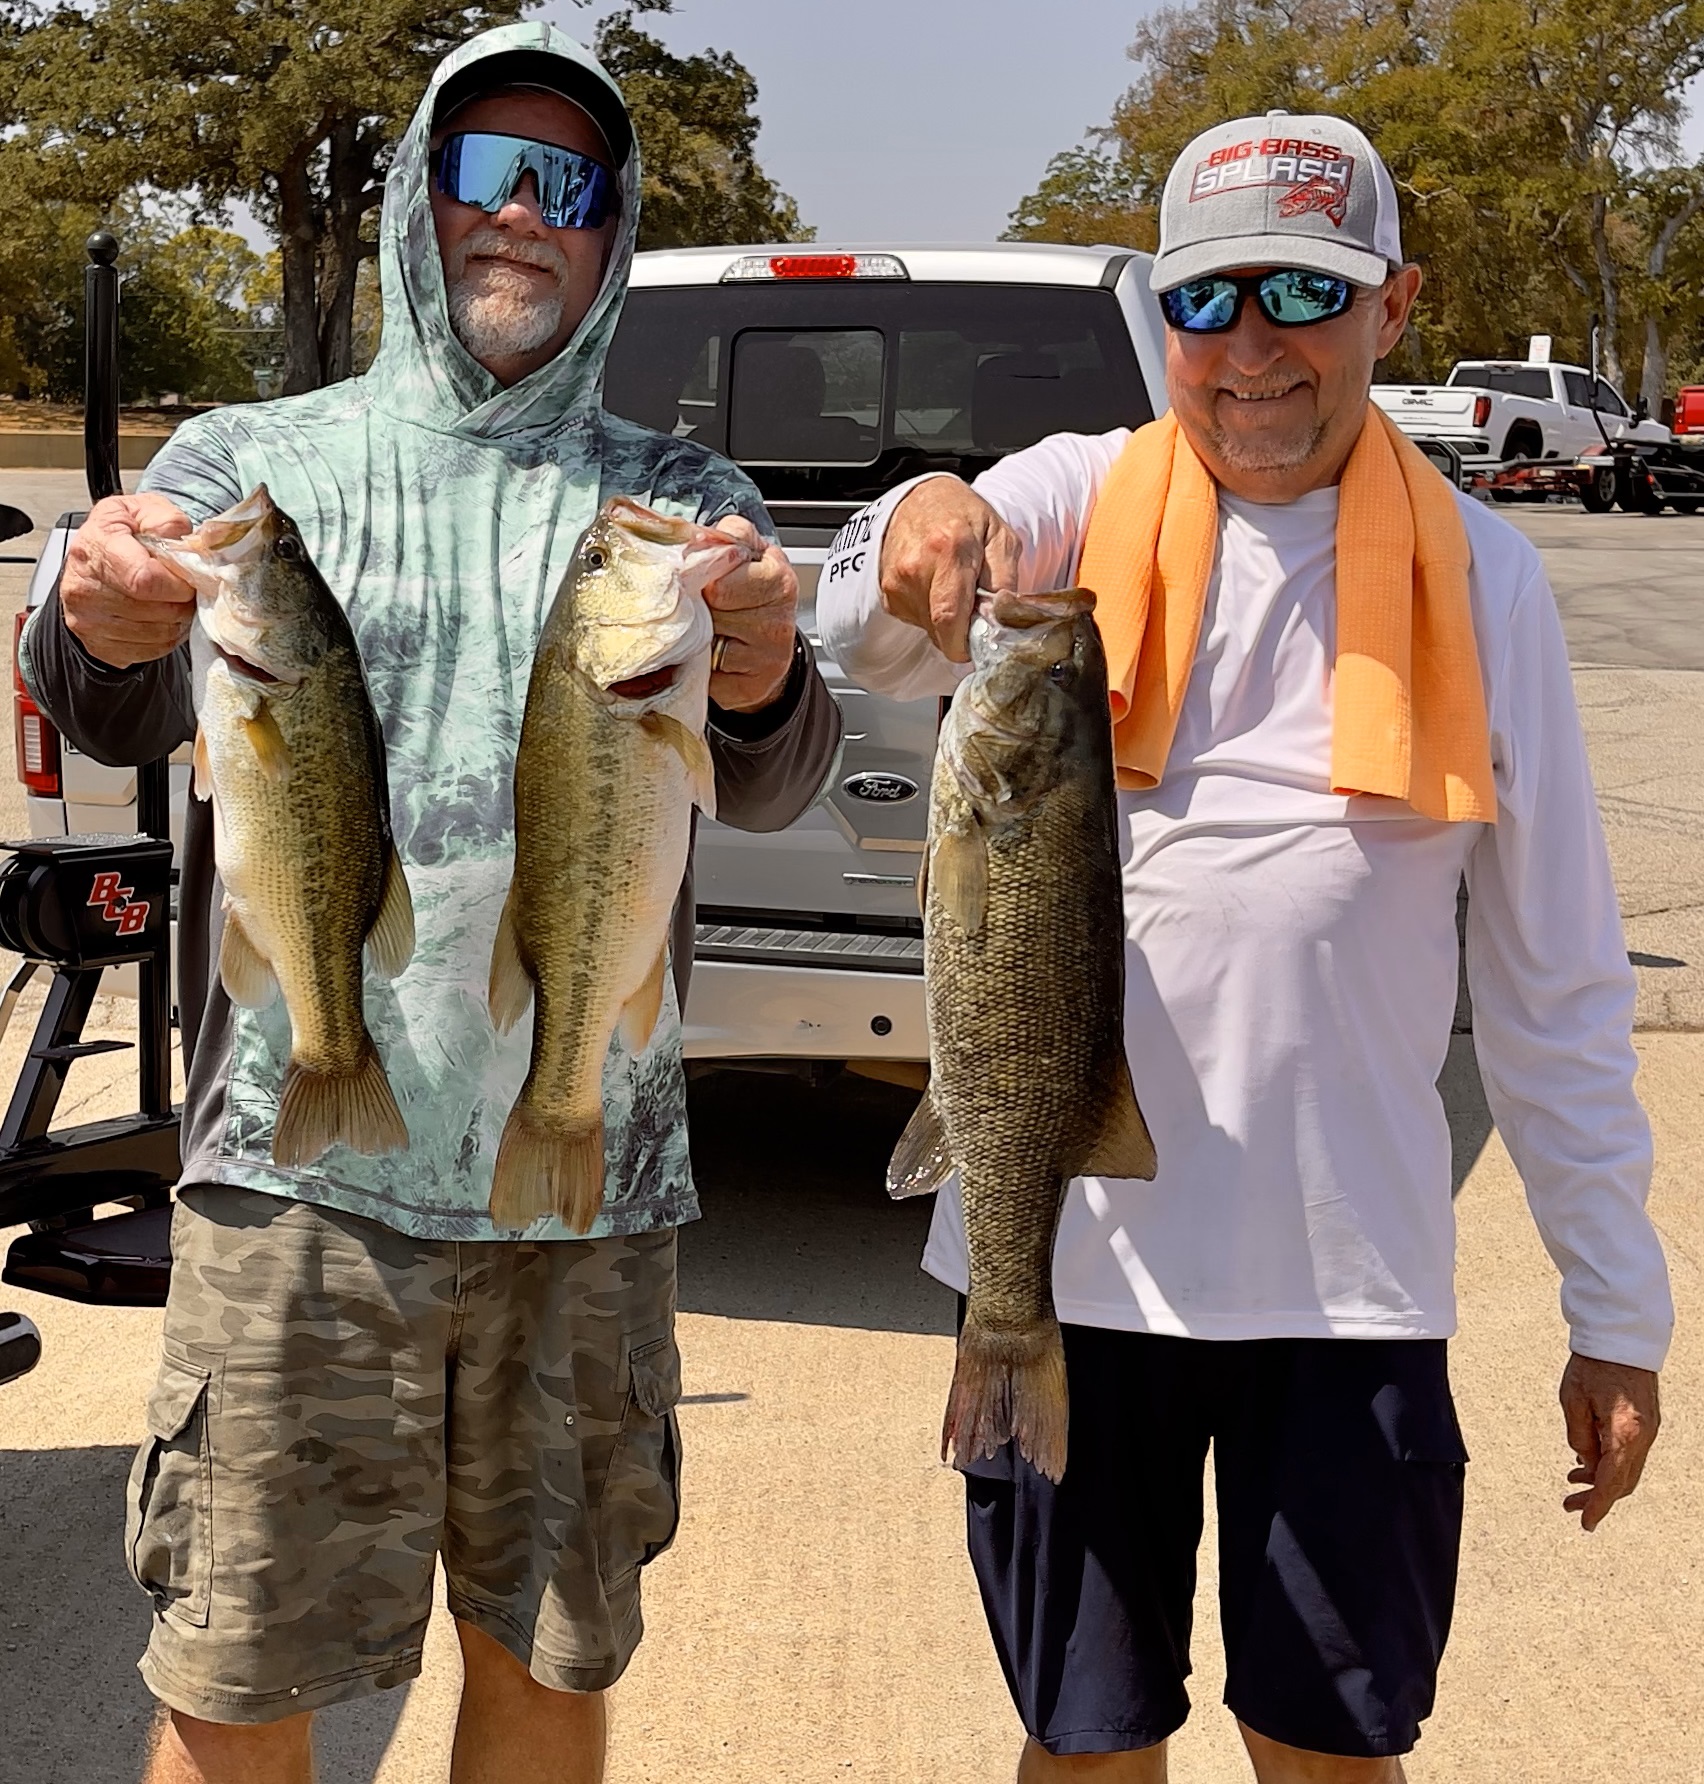 Steve Sullivan and Danny Ray took 2nd place with 9.16 lbs on Lake Grapevine!!